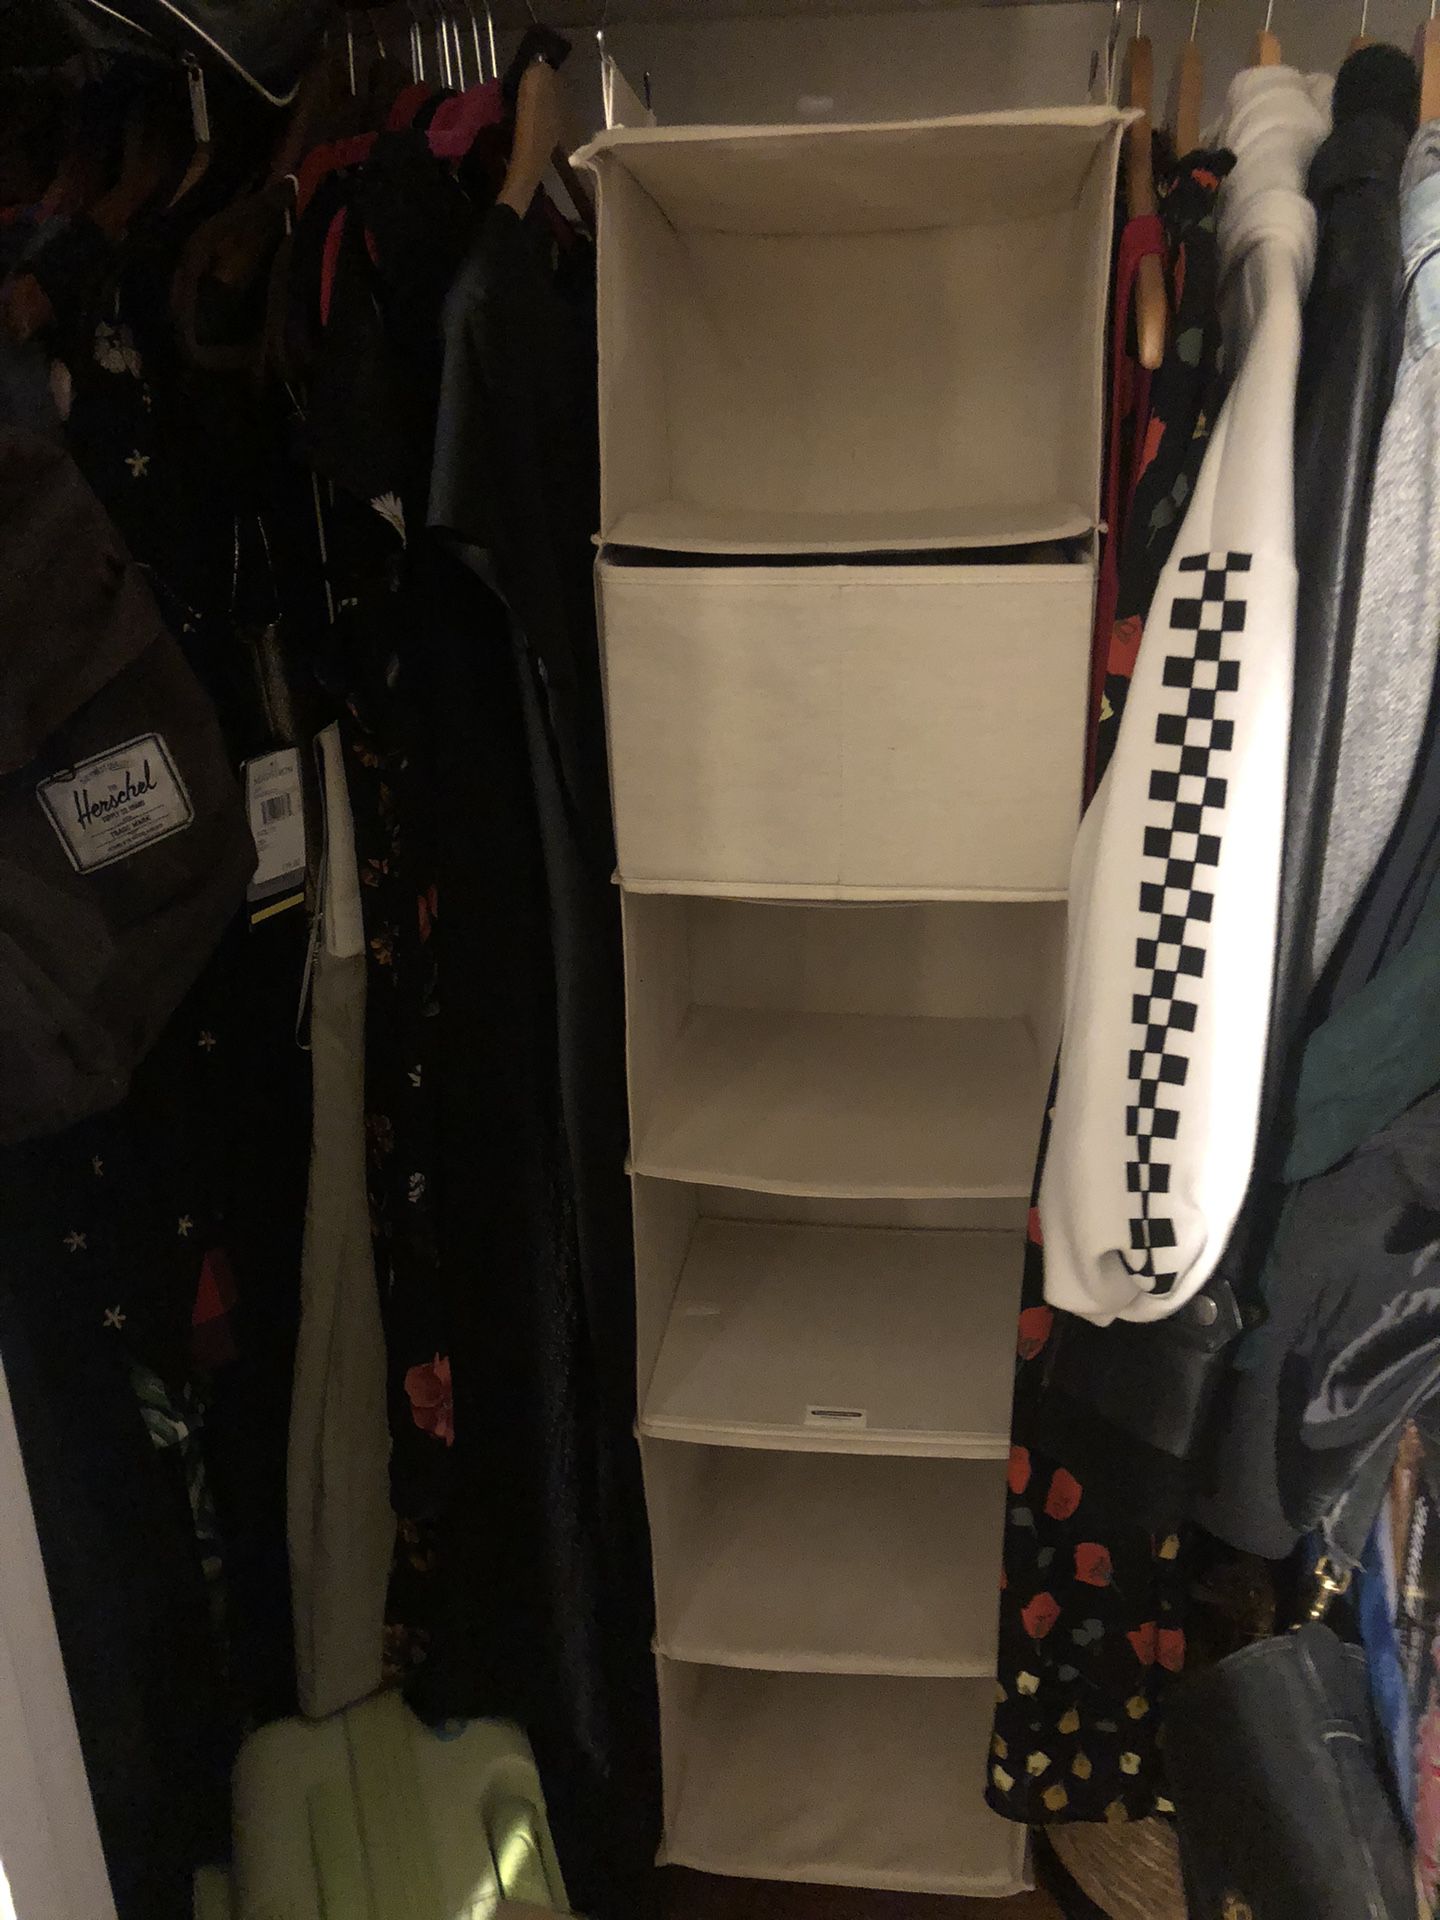 The Container Store 6 slot Hanging Wide Closet Organizer with one drawer